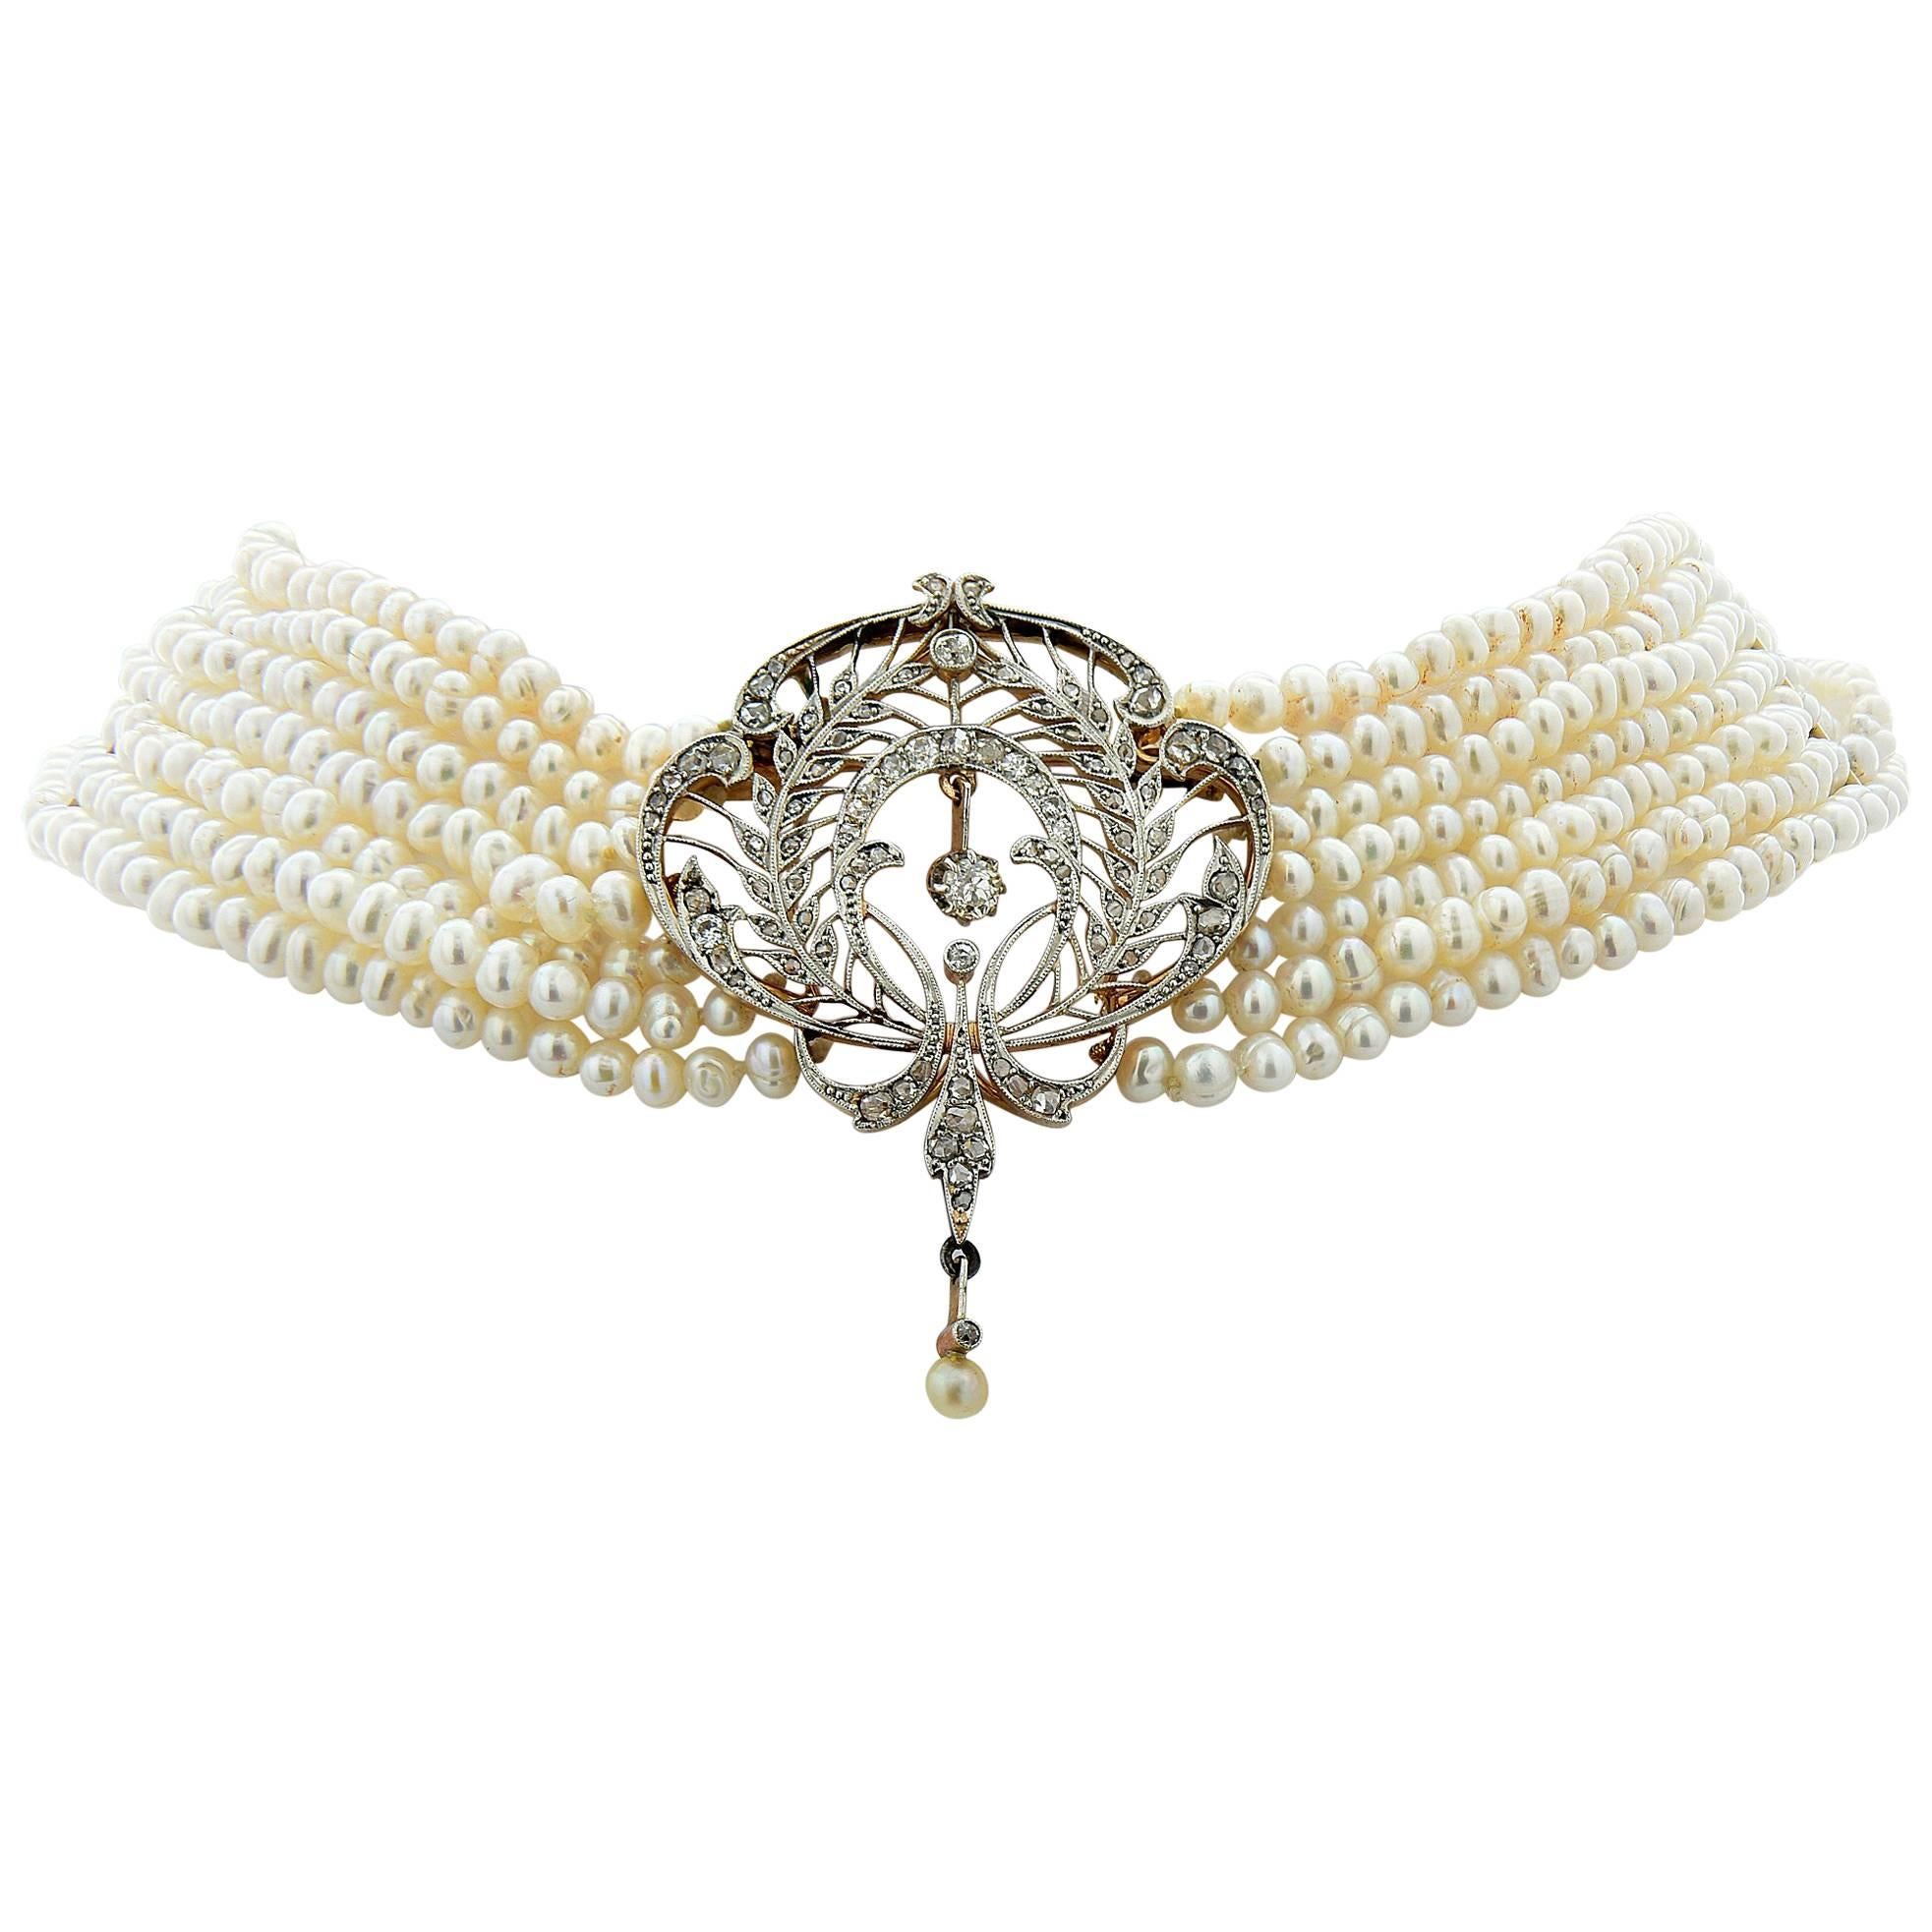 Victorian Brooch and Pearl Necklace